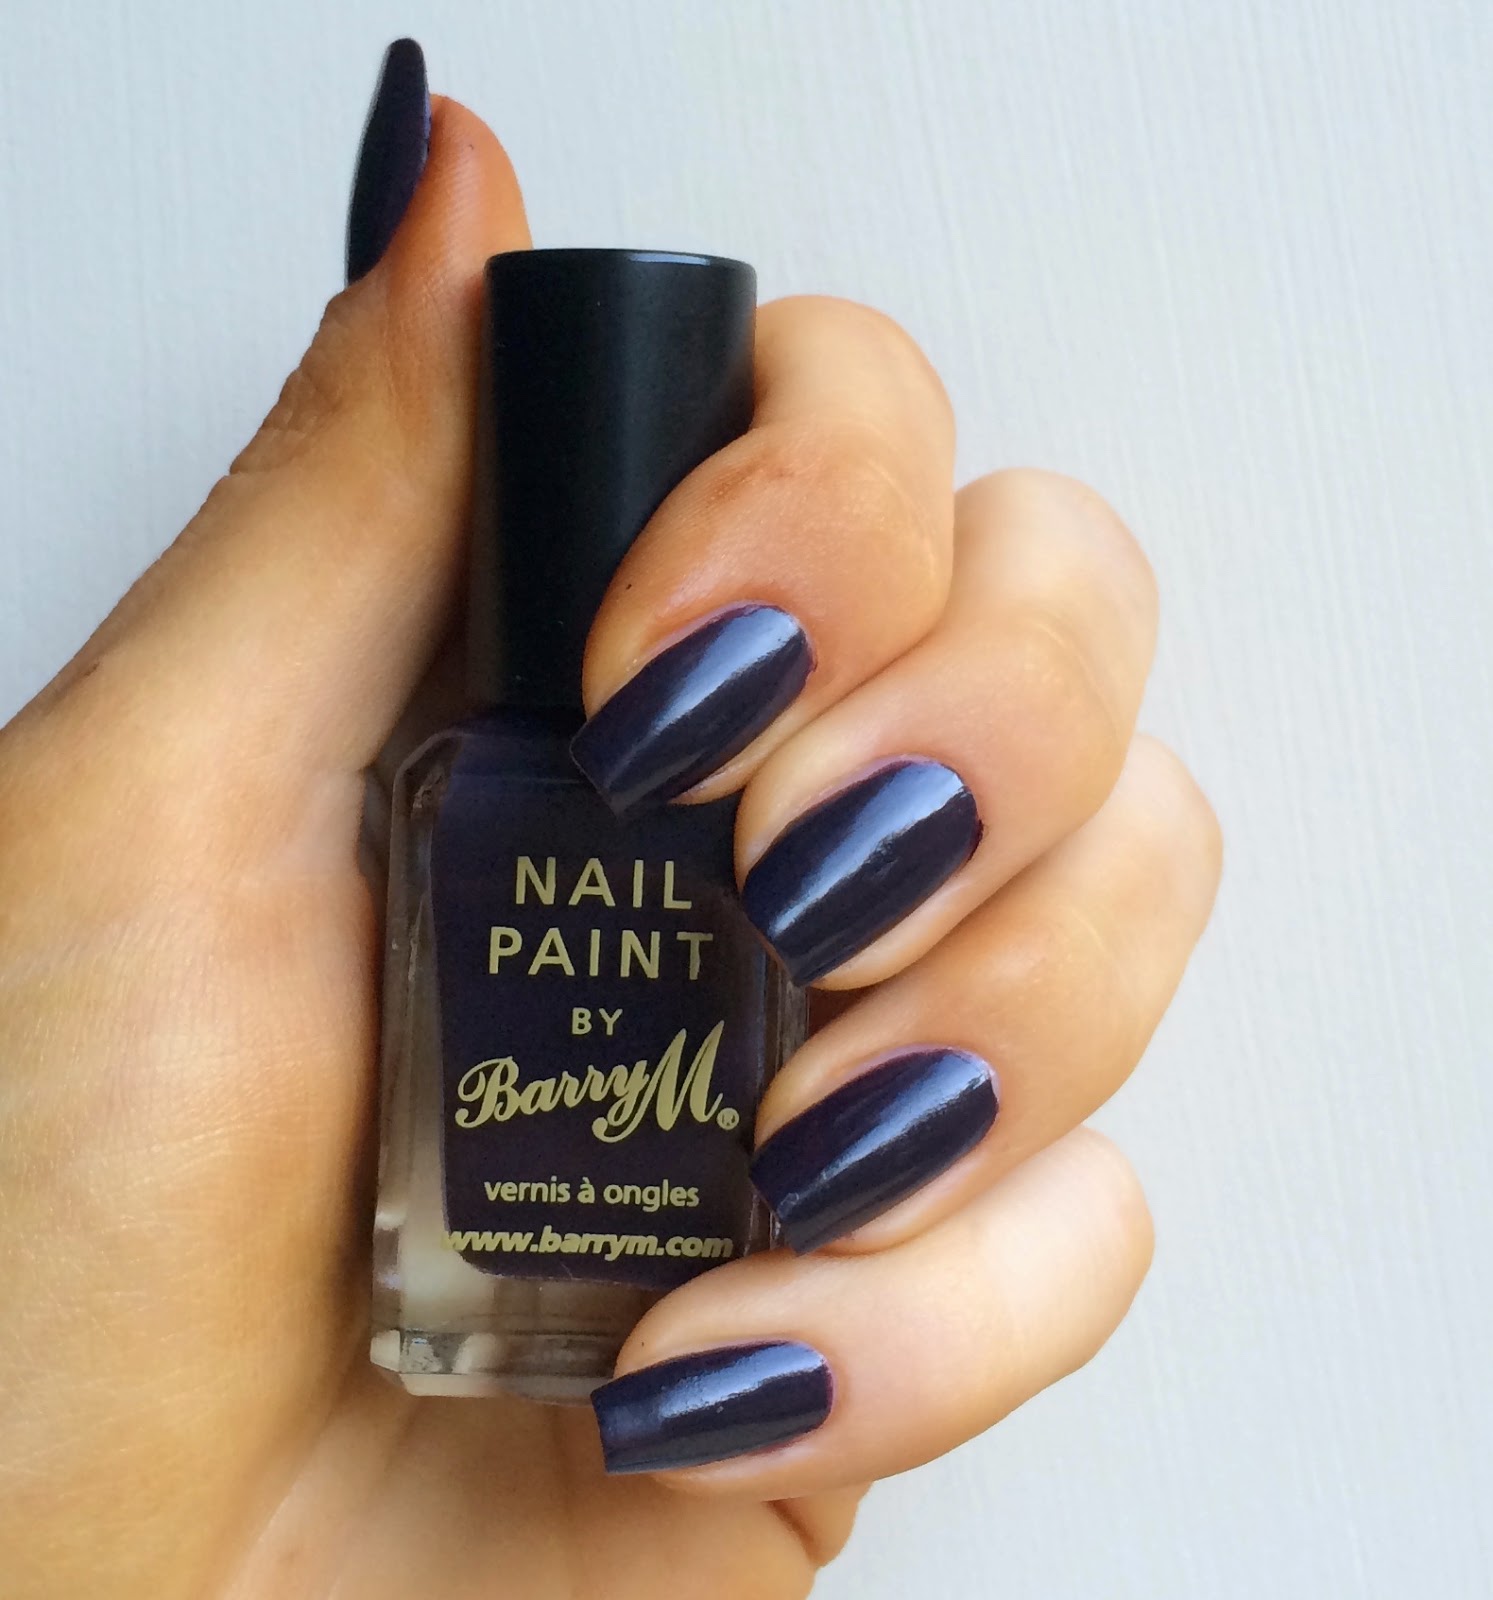 barry-m-nail-paint-nightshade-review-on-nails